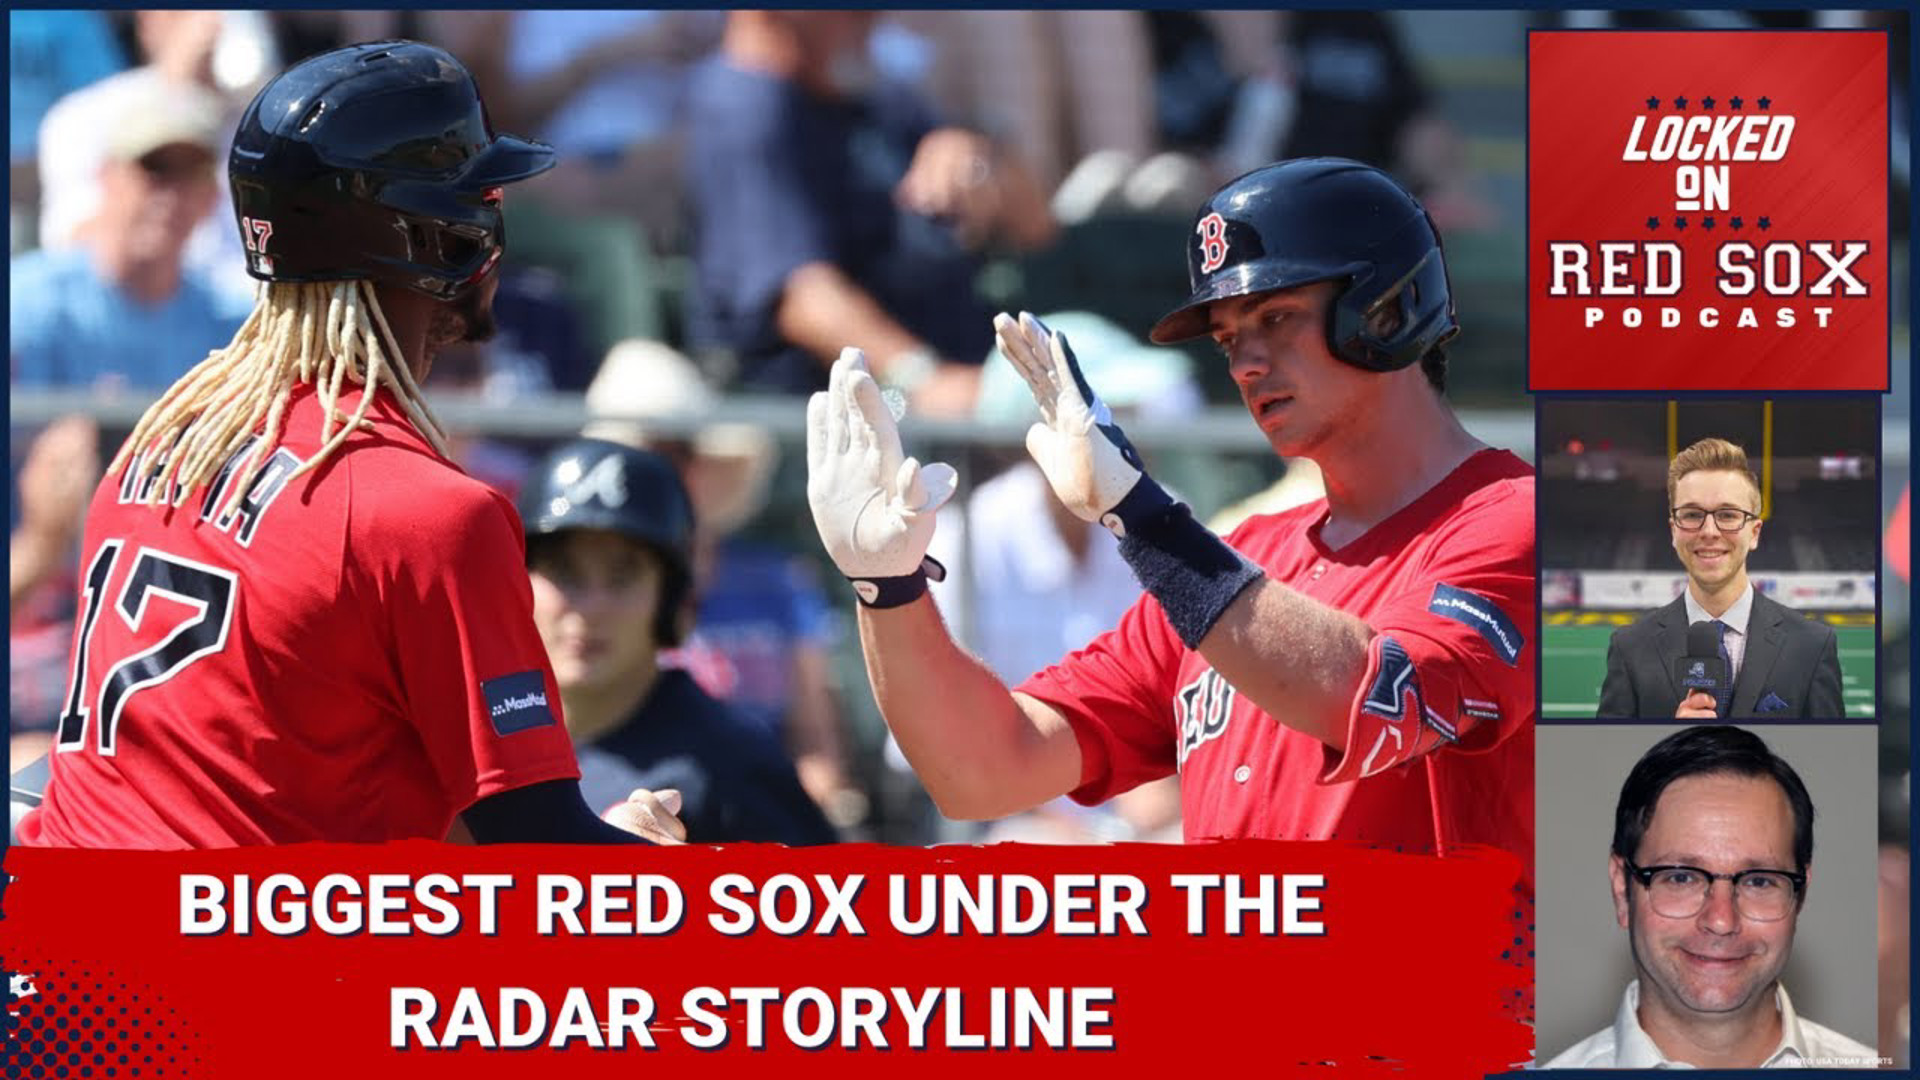 Boston Globe Red Sox beat writer Alex Speier joins Jake Ignaszewski to discuss the energy in the clubhouse compared to past seasons and the biggest storylines.